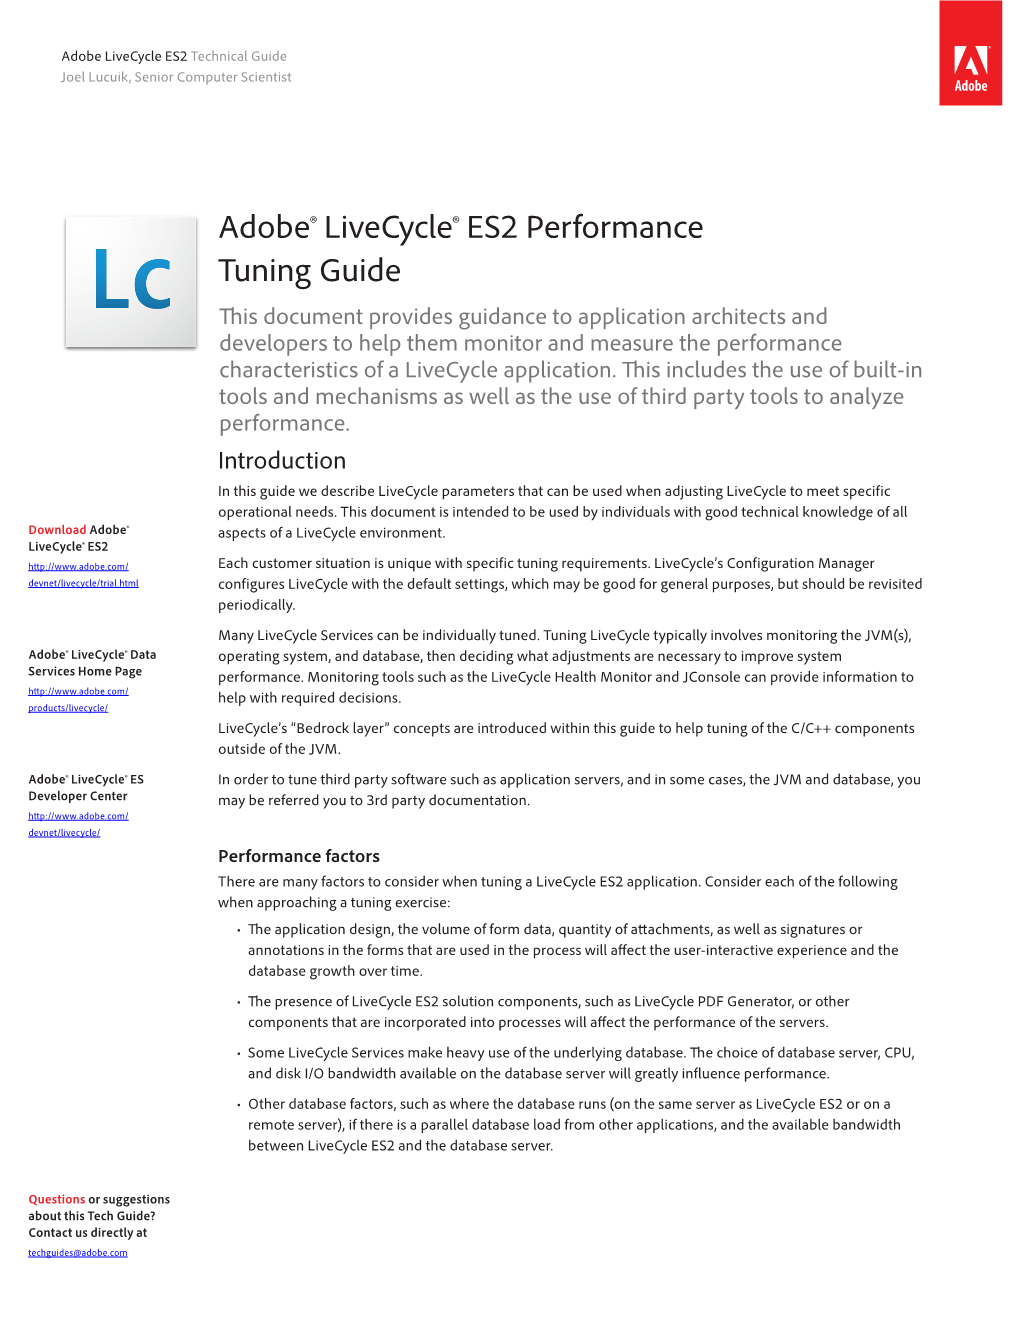 Adobe® Livecycle® ES2 Performance Tuning Guide